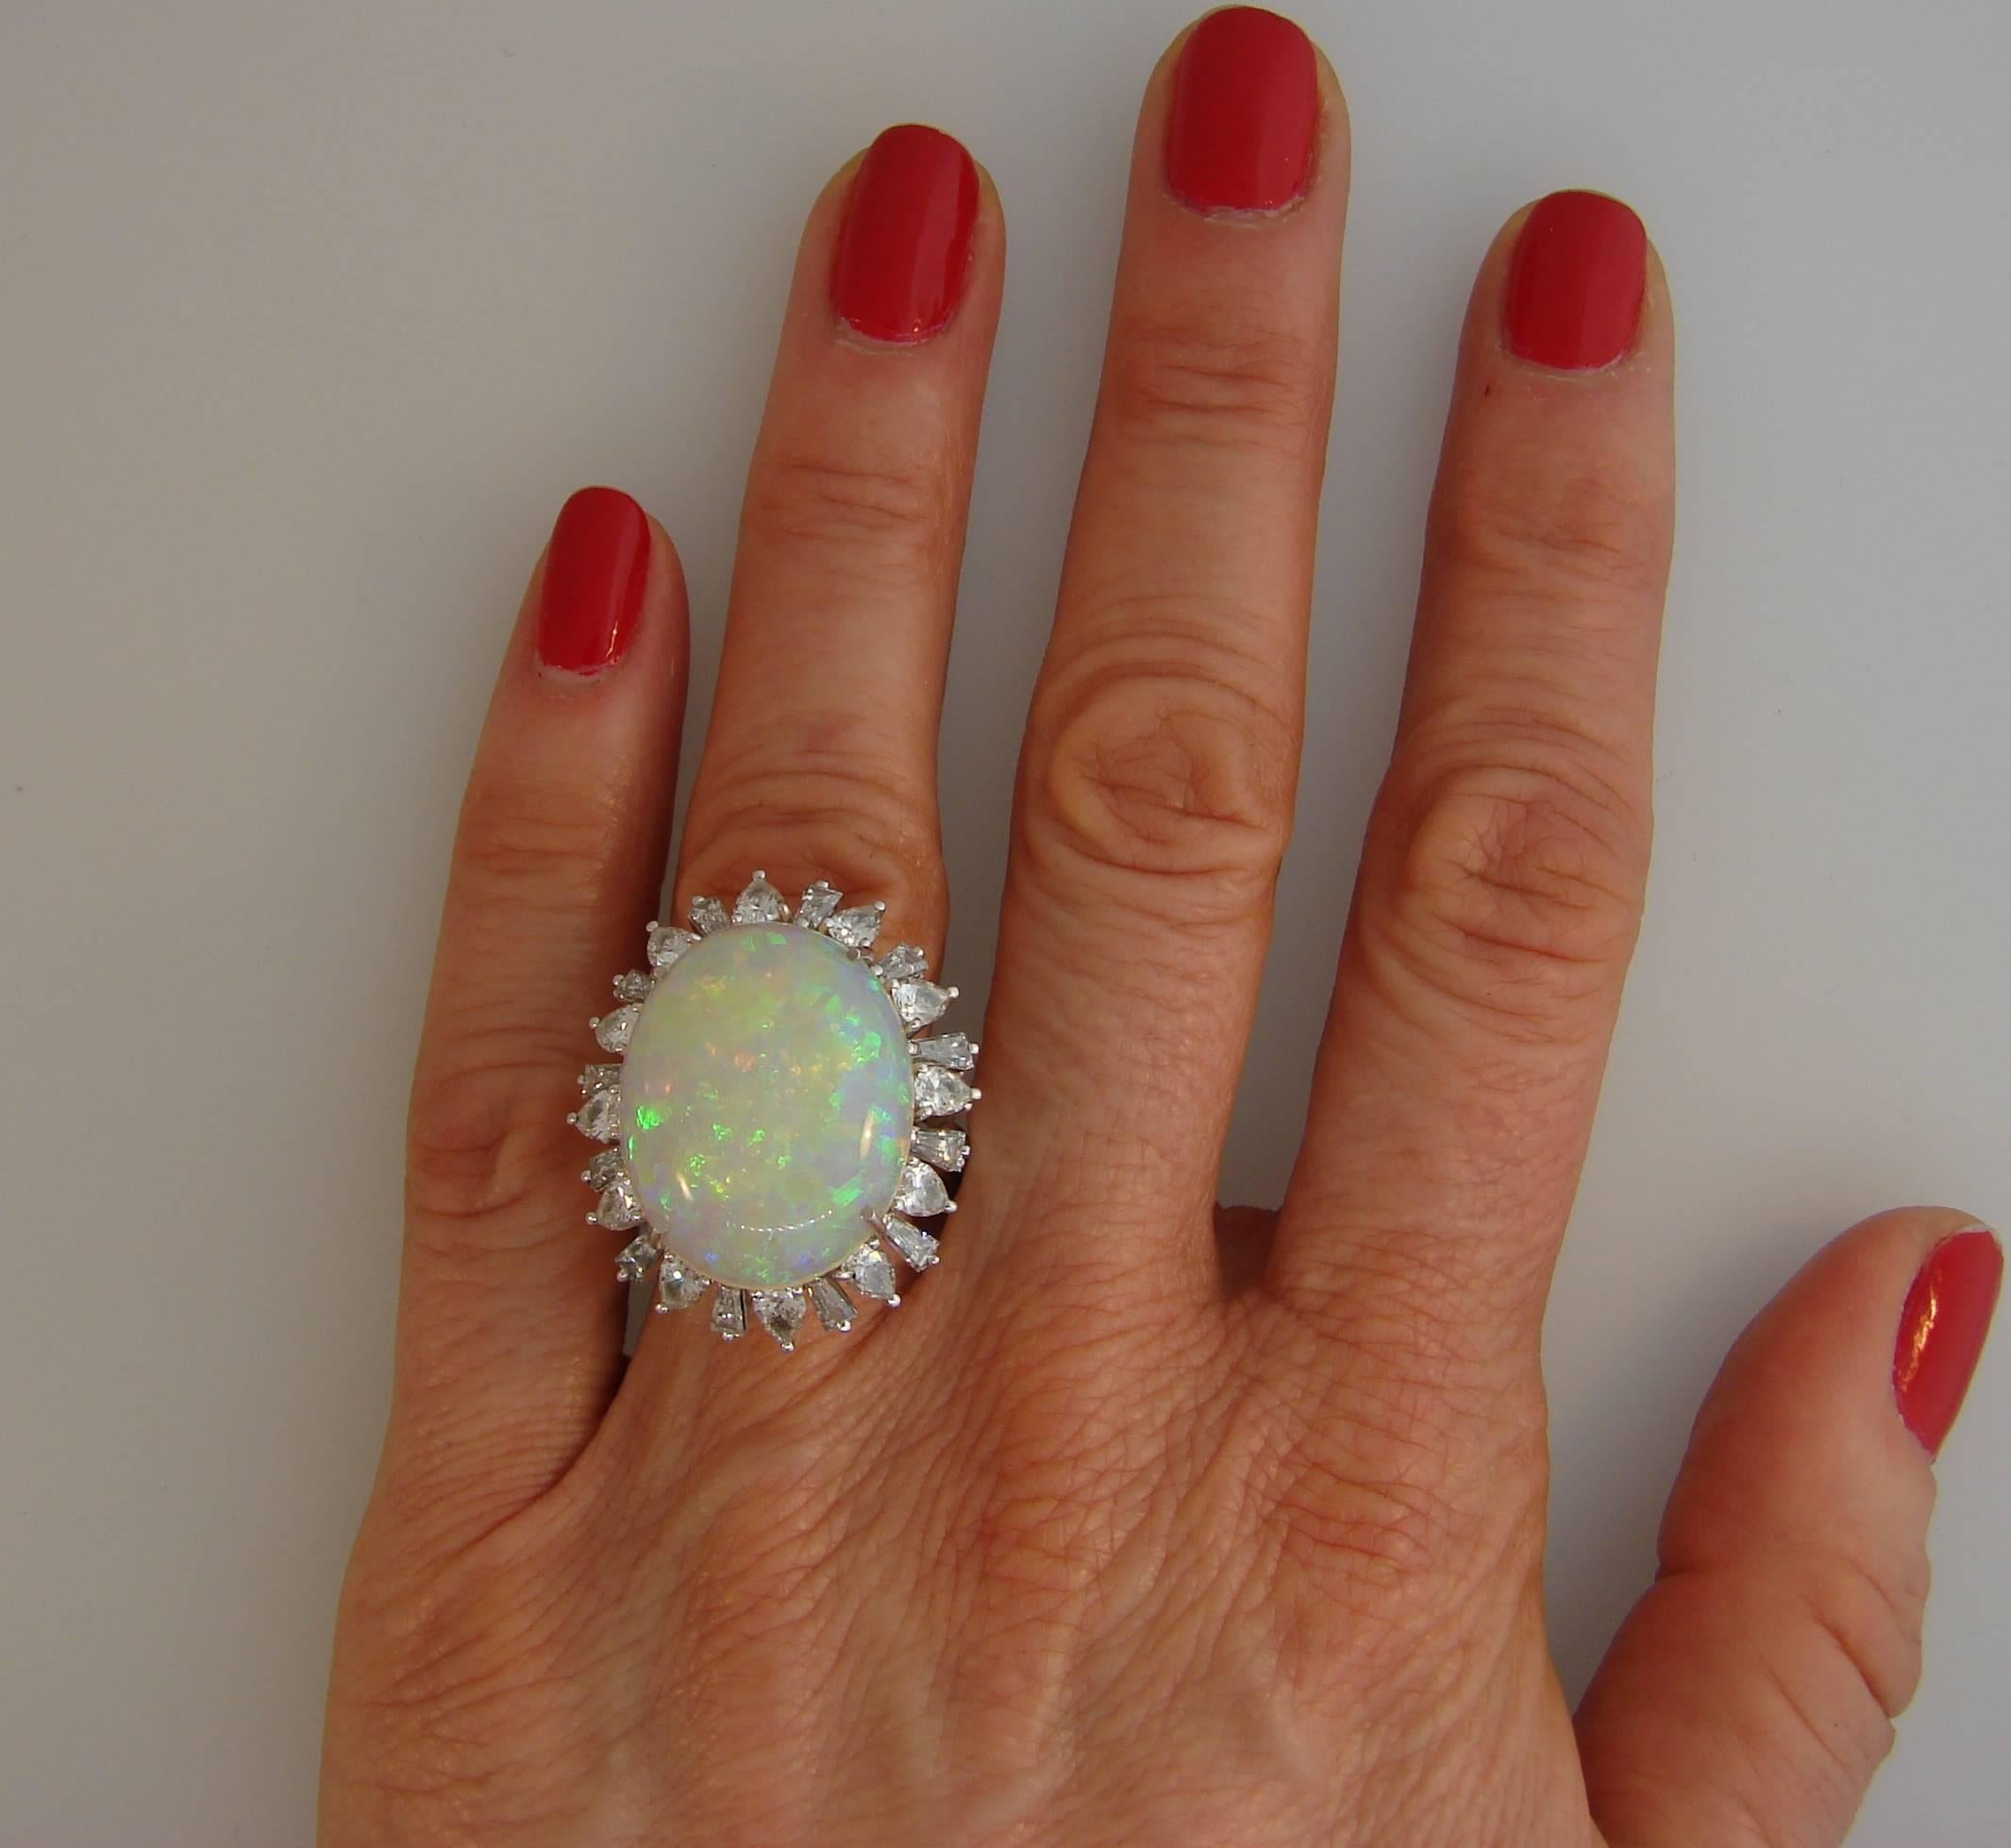 Stunning cocktail ring featuring an approximately 16-carat oval cabochon opal framed with diamonds and set in platinum. Bold and wearable ring that is a great addition to your jewelry collection.
Size 8; re-sizable.
The opal measures 22.92 x 18.18 x